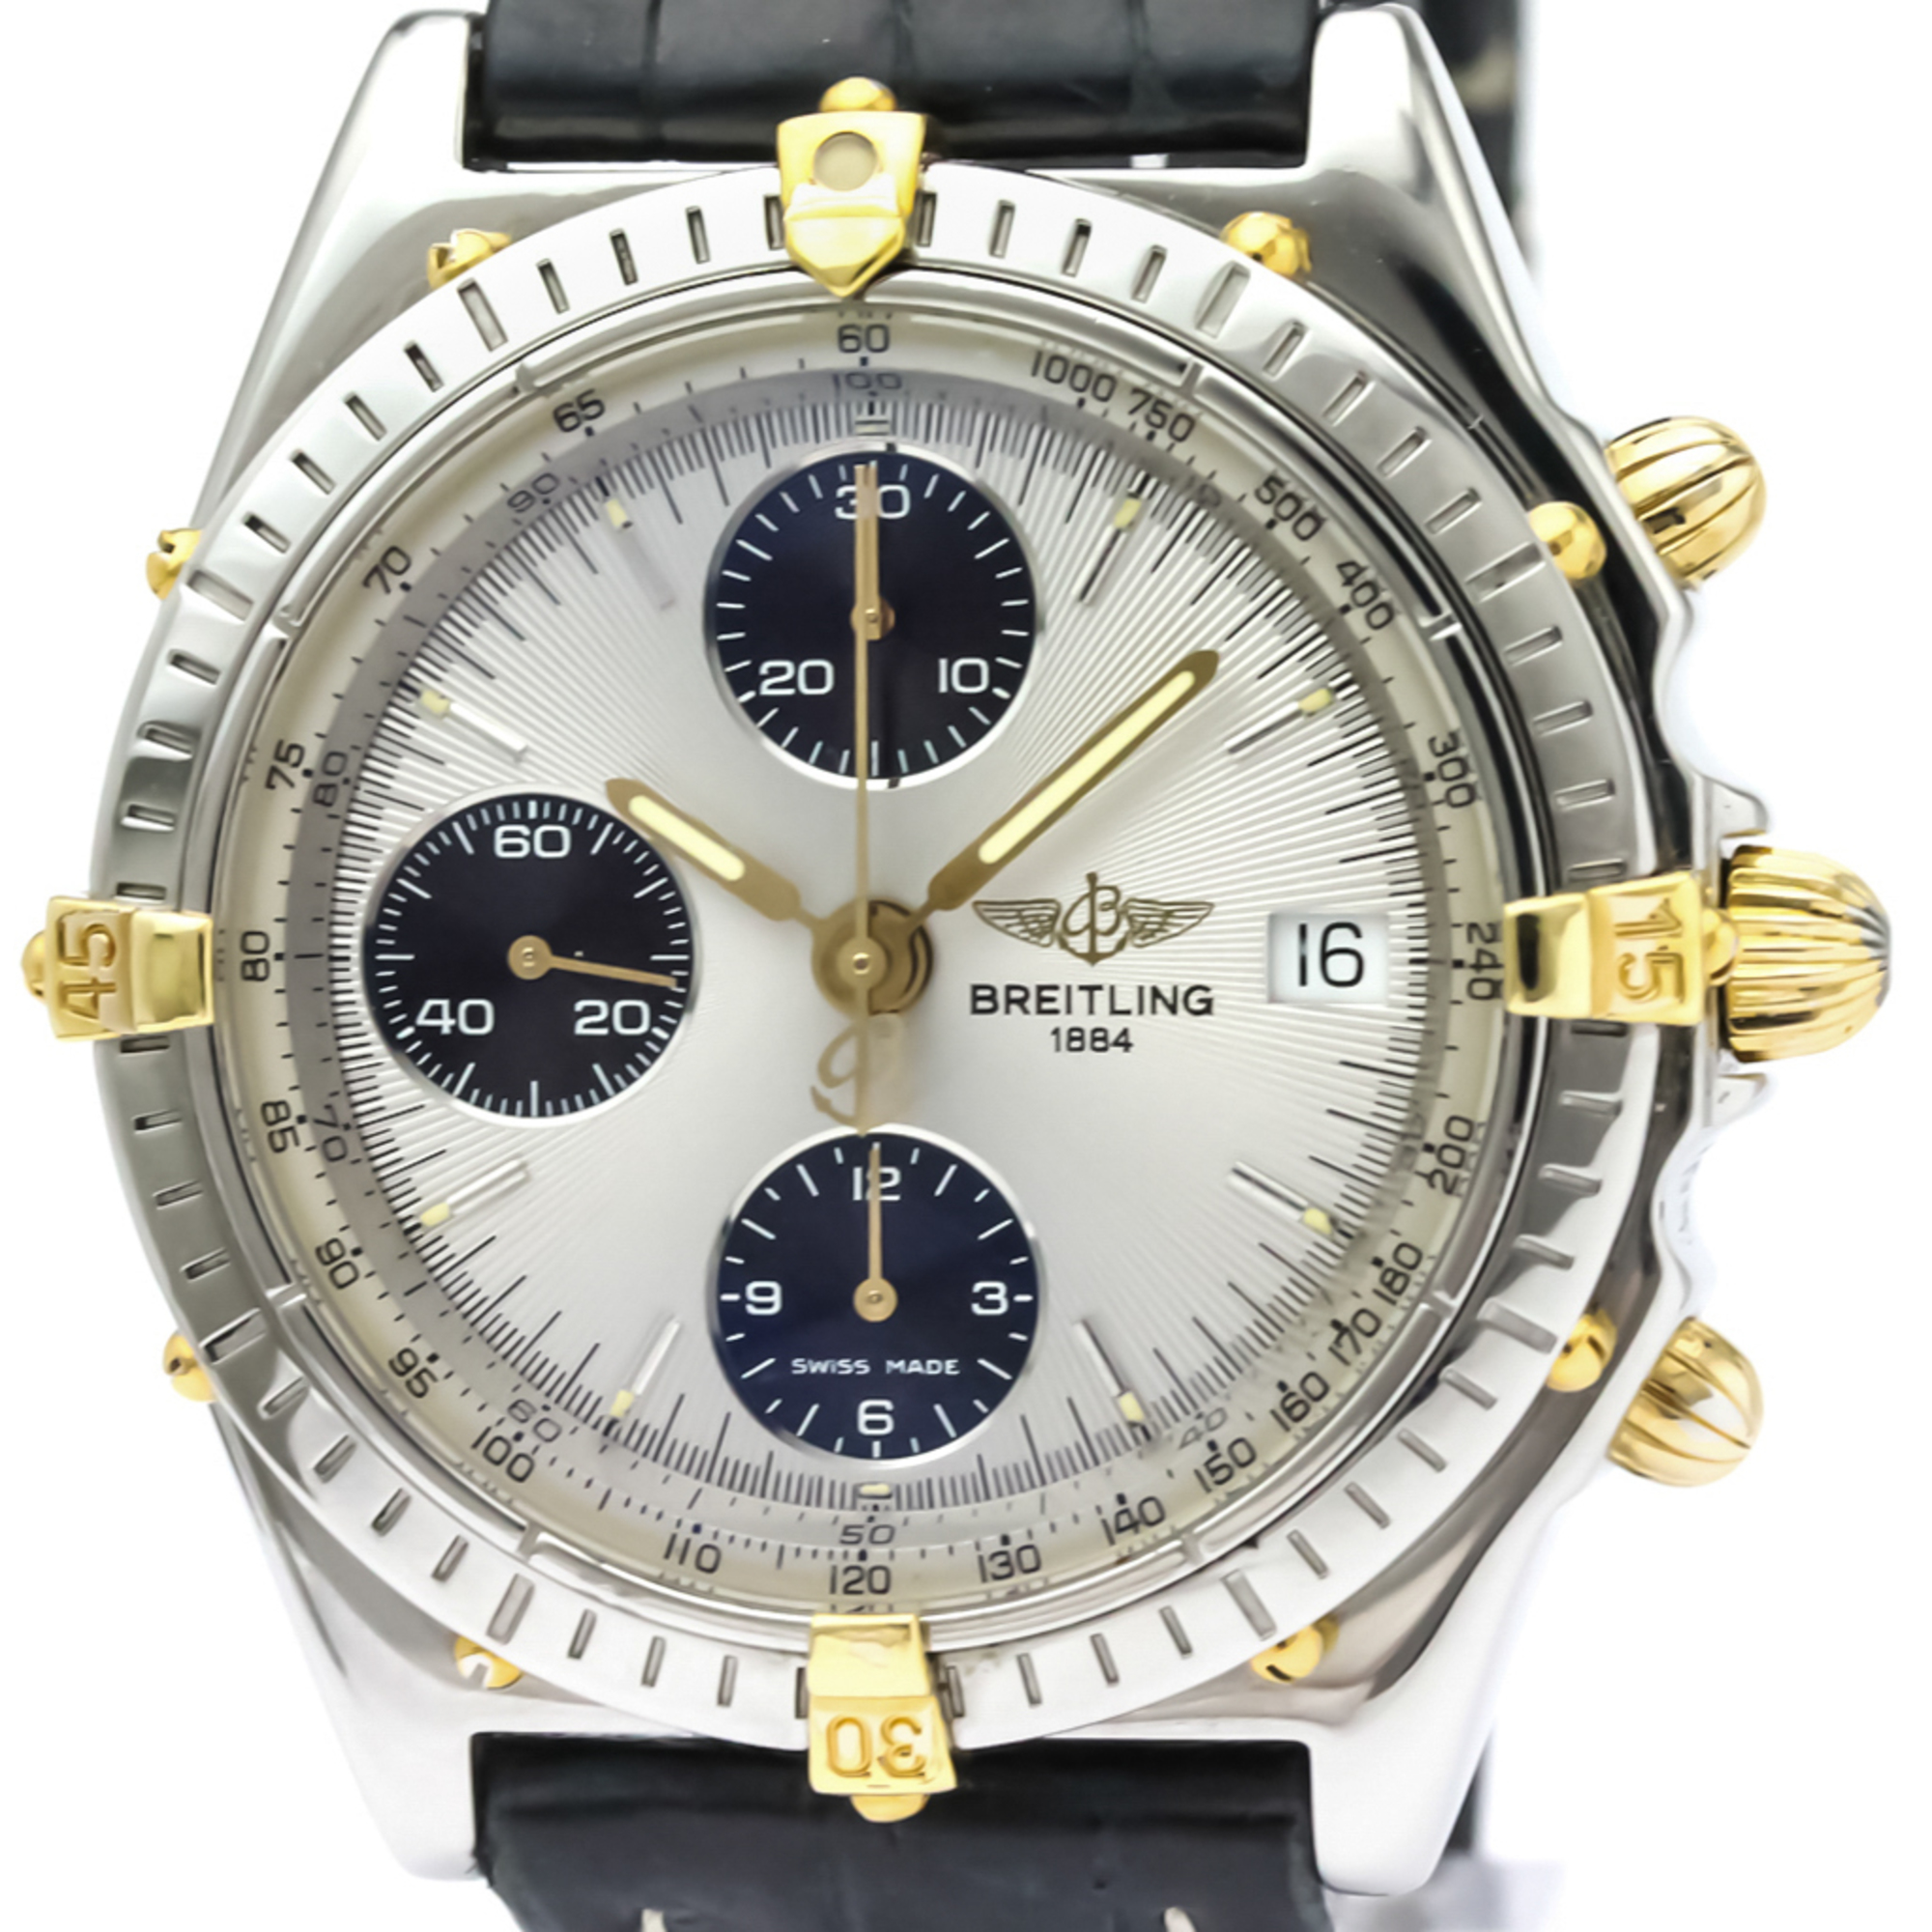 Breitling Chronomat Automatic Stainless Steel,Yellow Gold (18K) Men's Sports Watch B13050